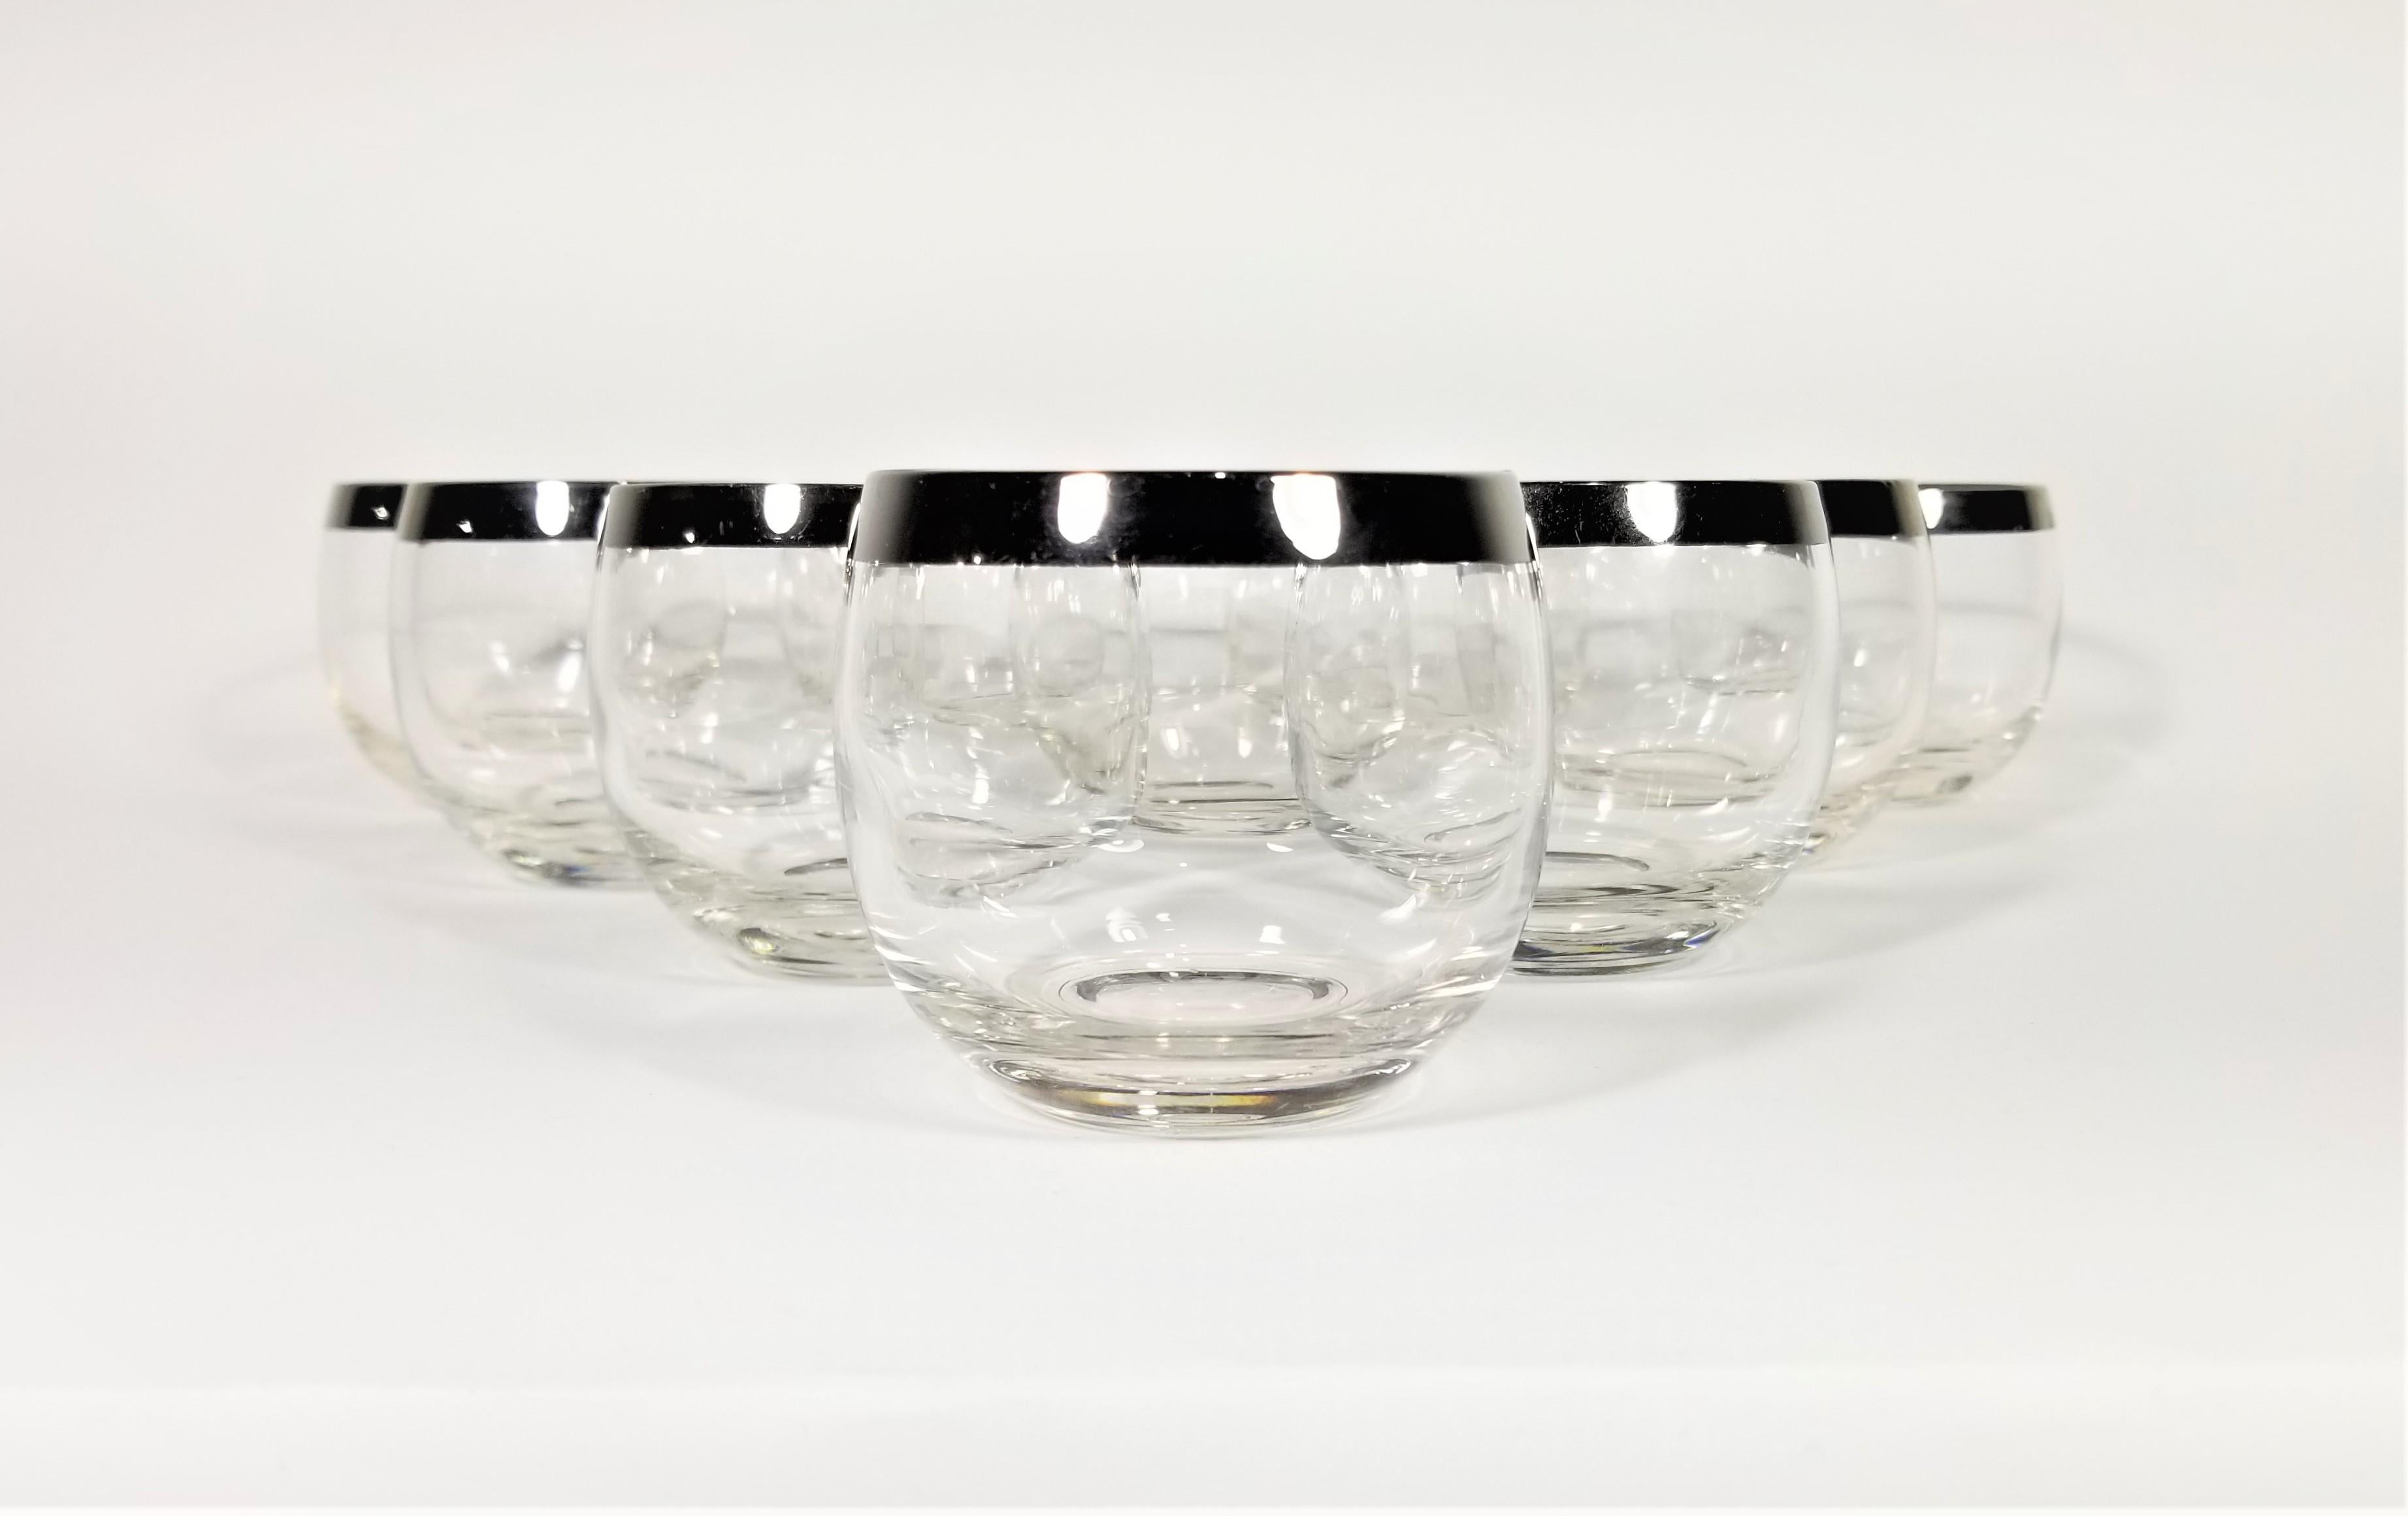 1960s midcentury Dorothy Thorpe silver rimmed glassware barware set of 10. Often referred to as
Roly Poly glasses due to there round modern design. An excellent addition to any table, home bar or bar cart.